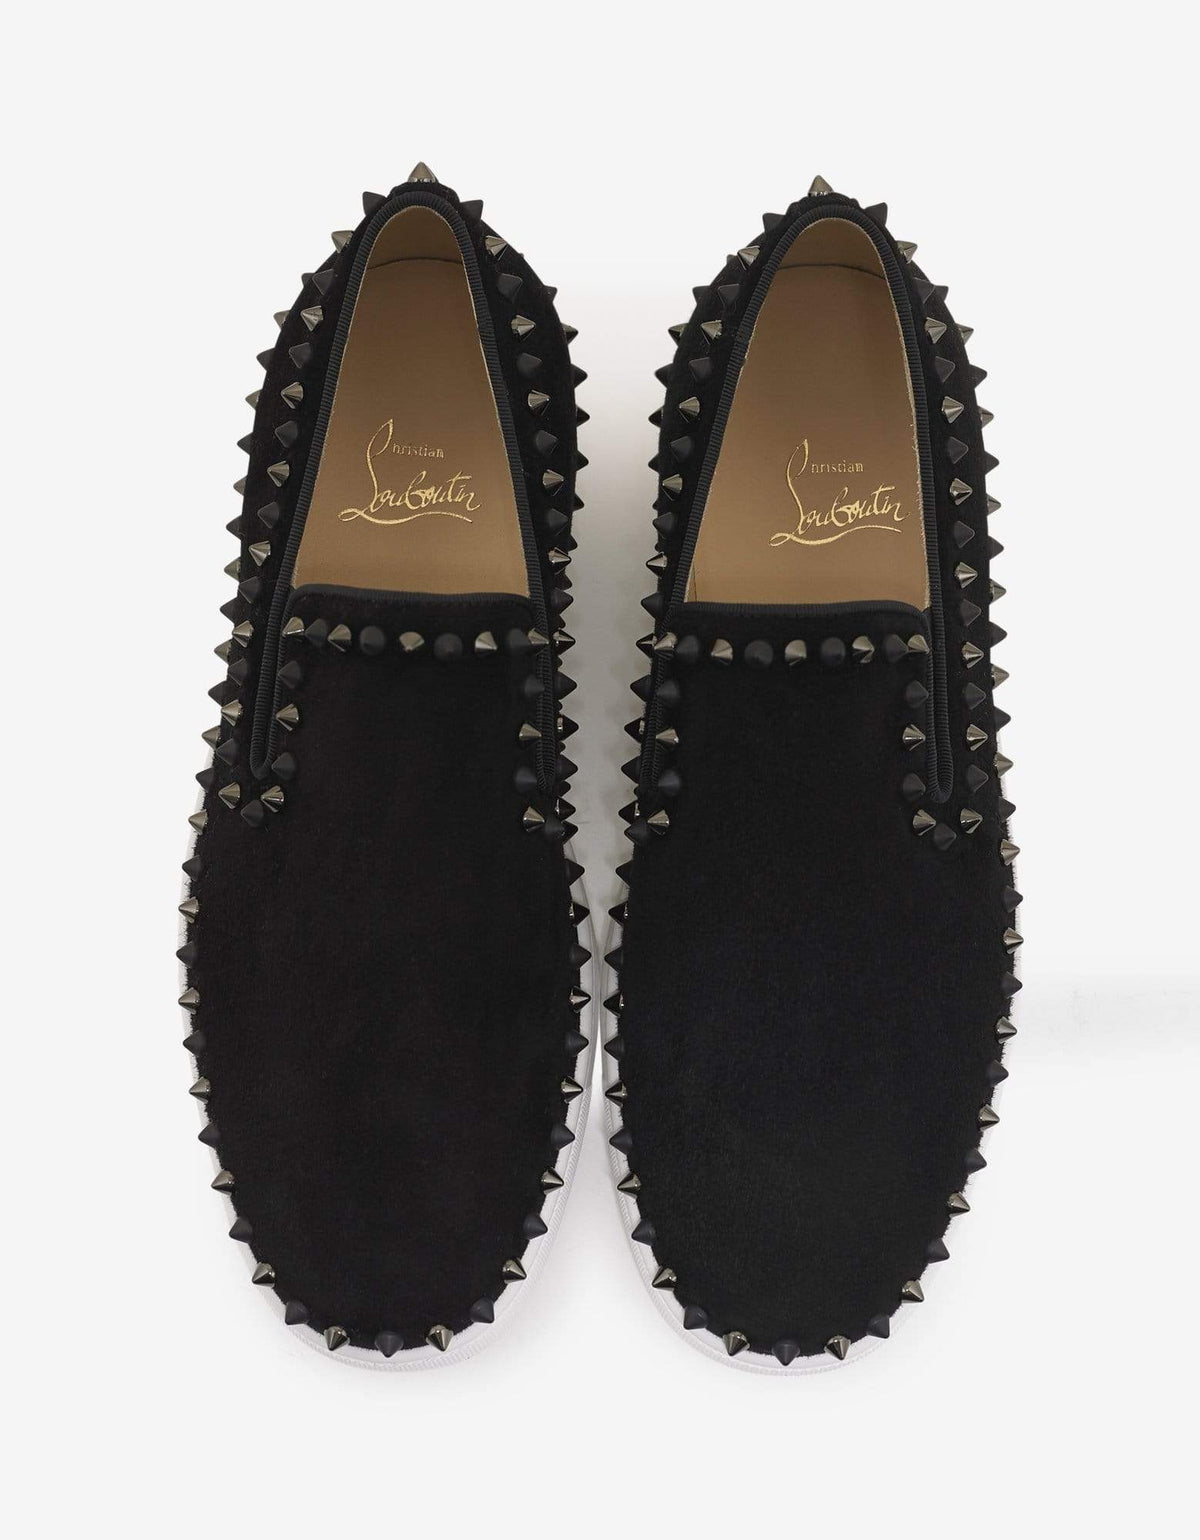 Christian Louboutin Pik Boat Flat Black Suede Mix Spikes Trainers